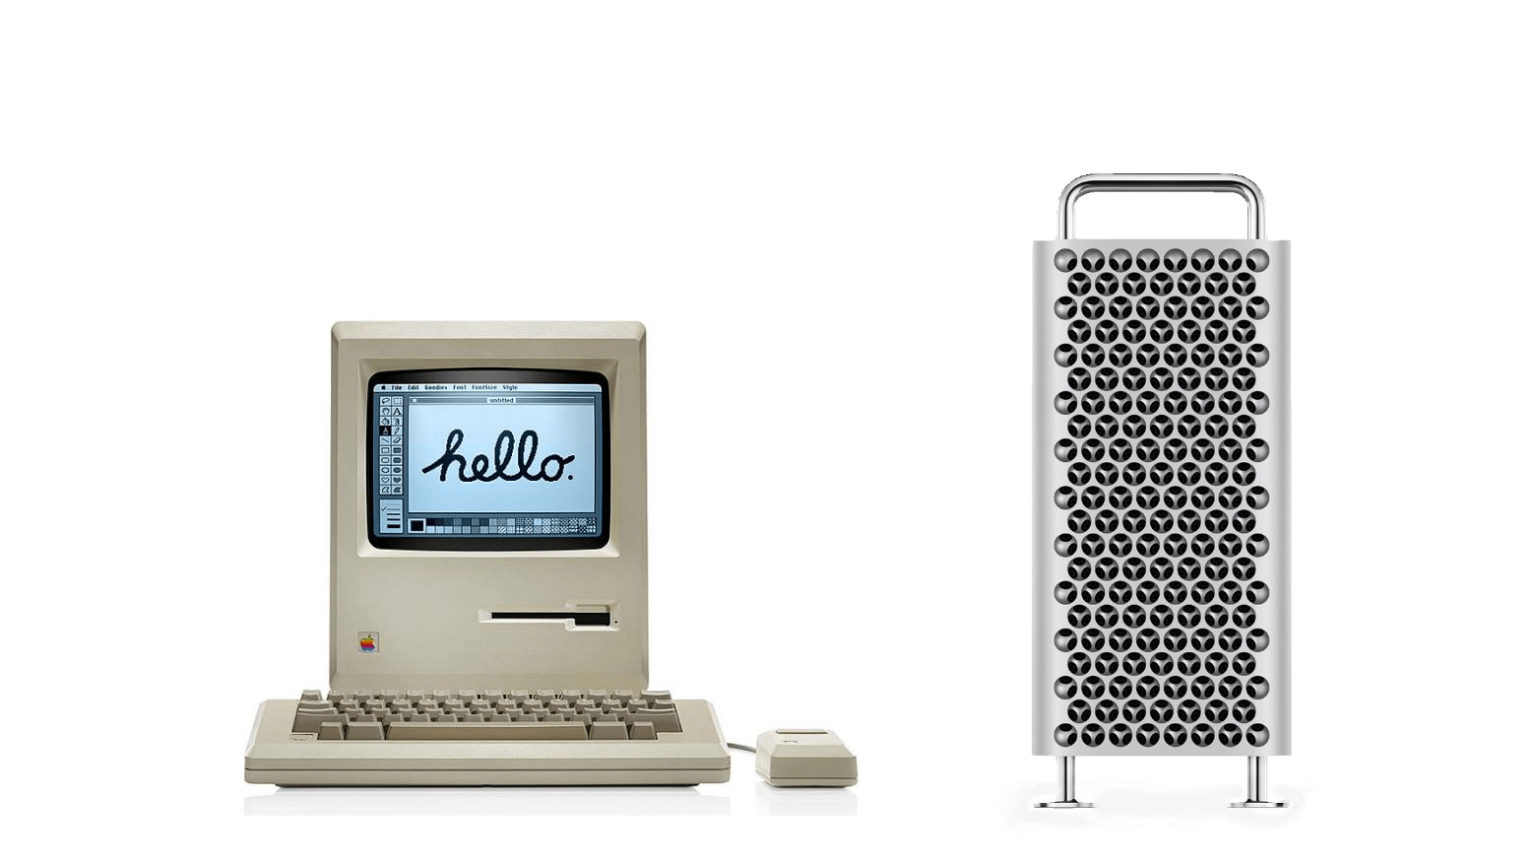 2019 Mac Pro and original Macintosh 128K: Which cost more.